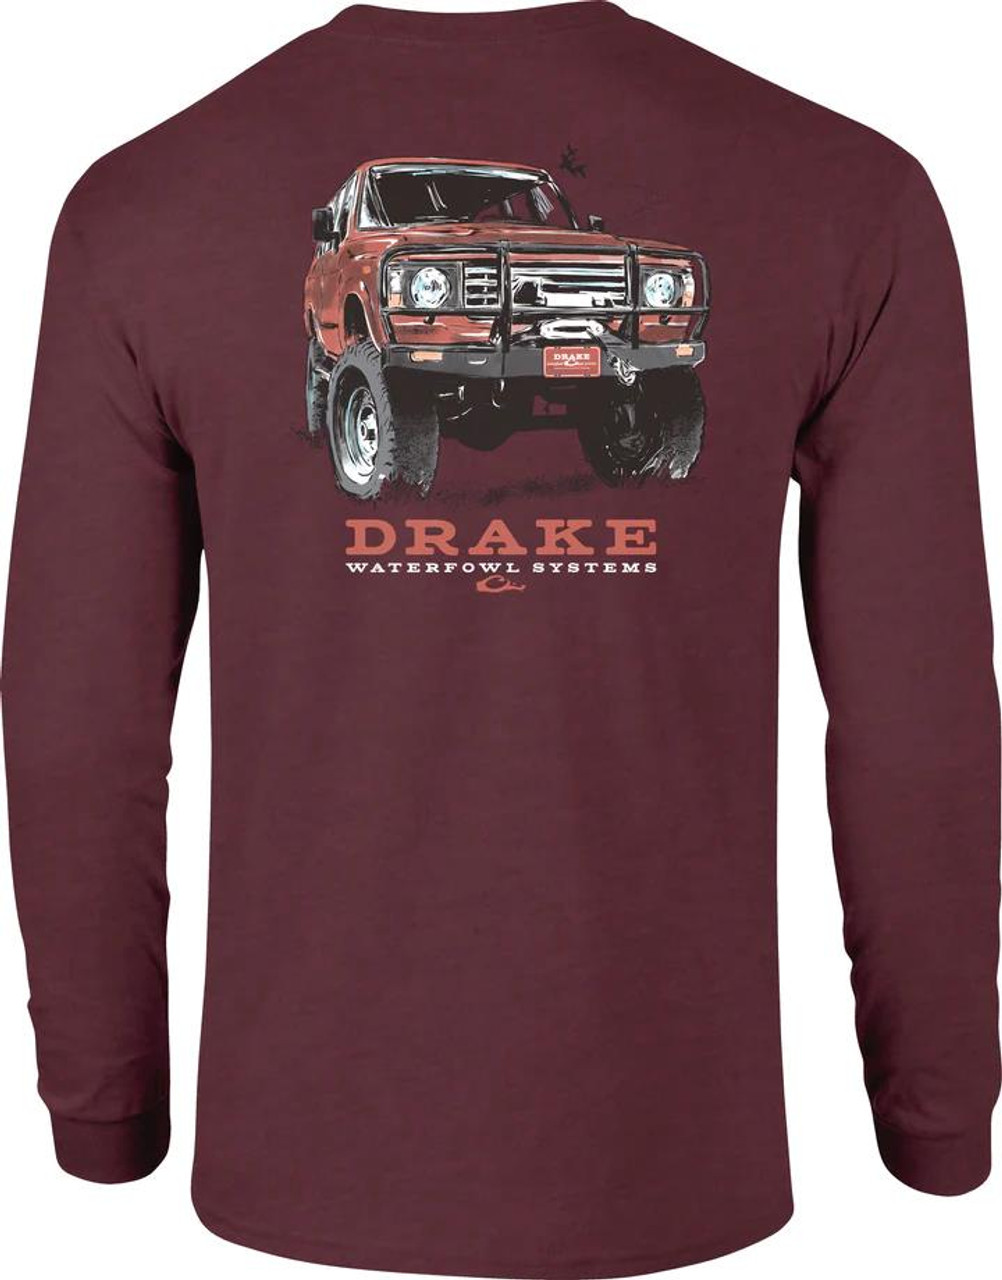 https://cdn11.bigcommerce.com/s-0xmhwue6/images/stencil/1280x1280/products/27450/68246/Drake-Waterfowl-4X4-T-Shirt-Long-Sleeve-Wild-Ginger-Heather-FAMILY5414_image1__19097.1689269283.jpg?c=2